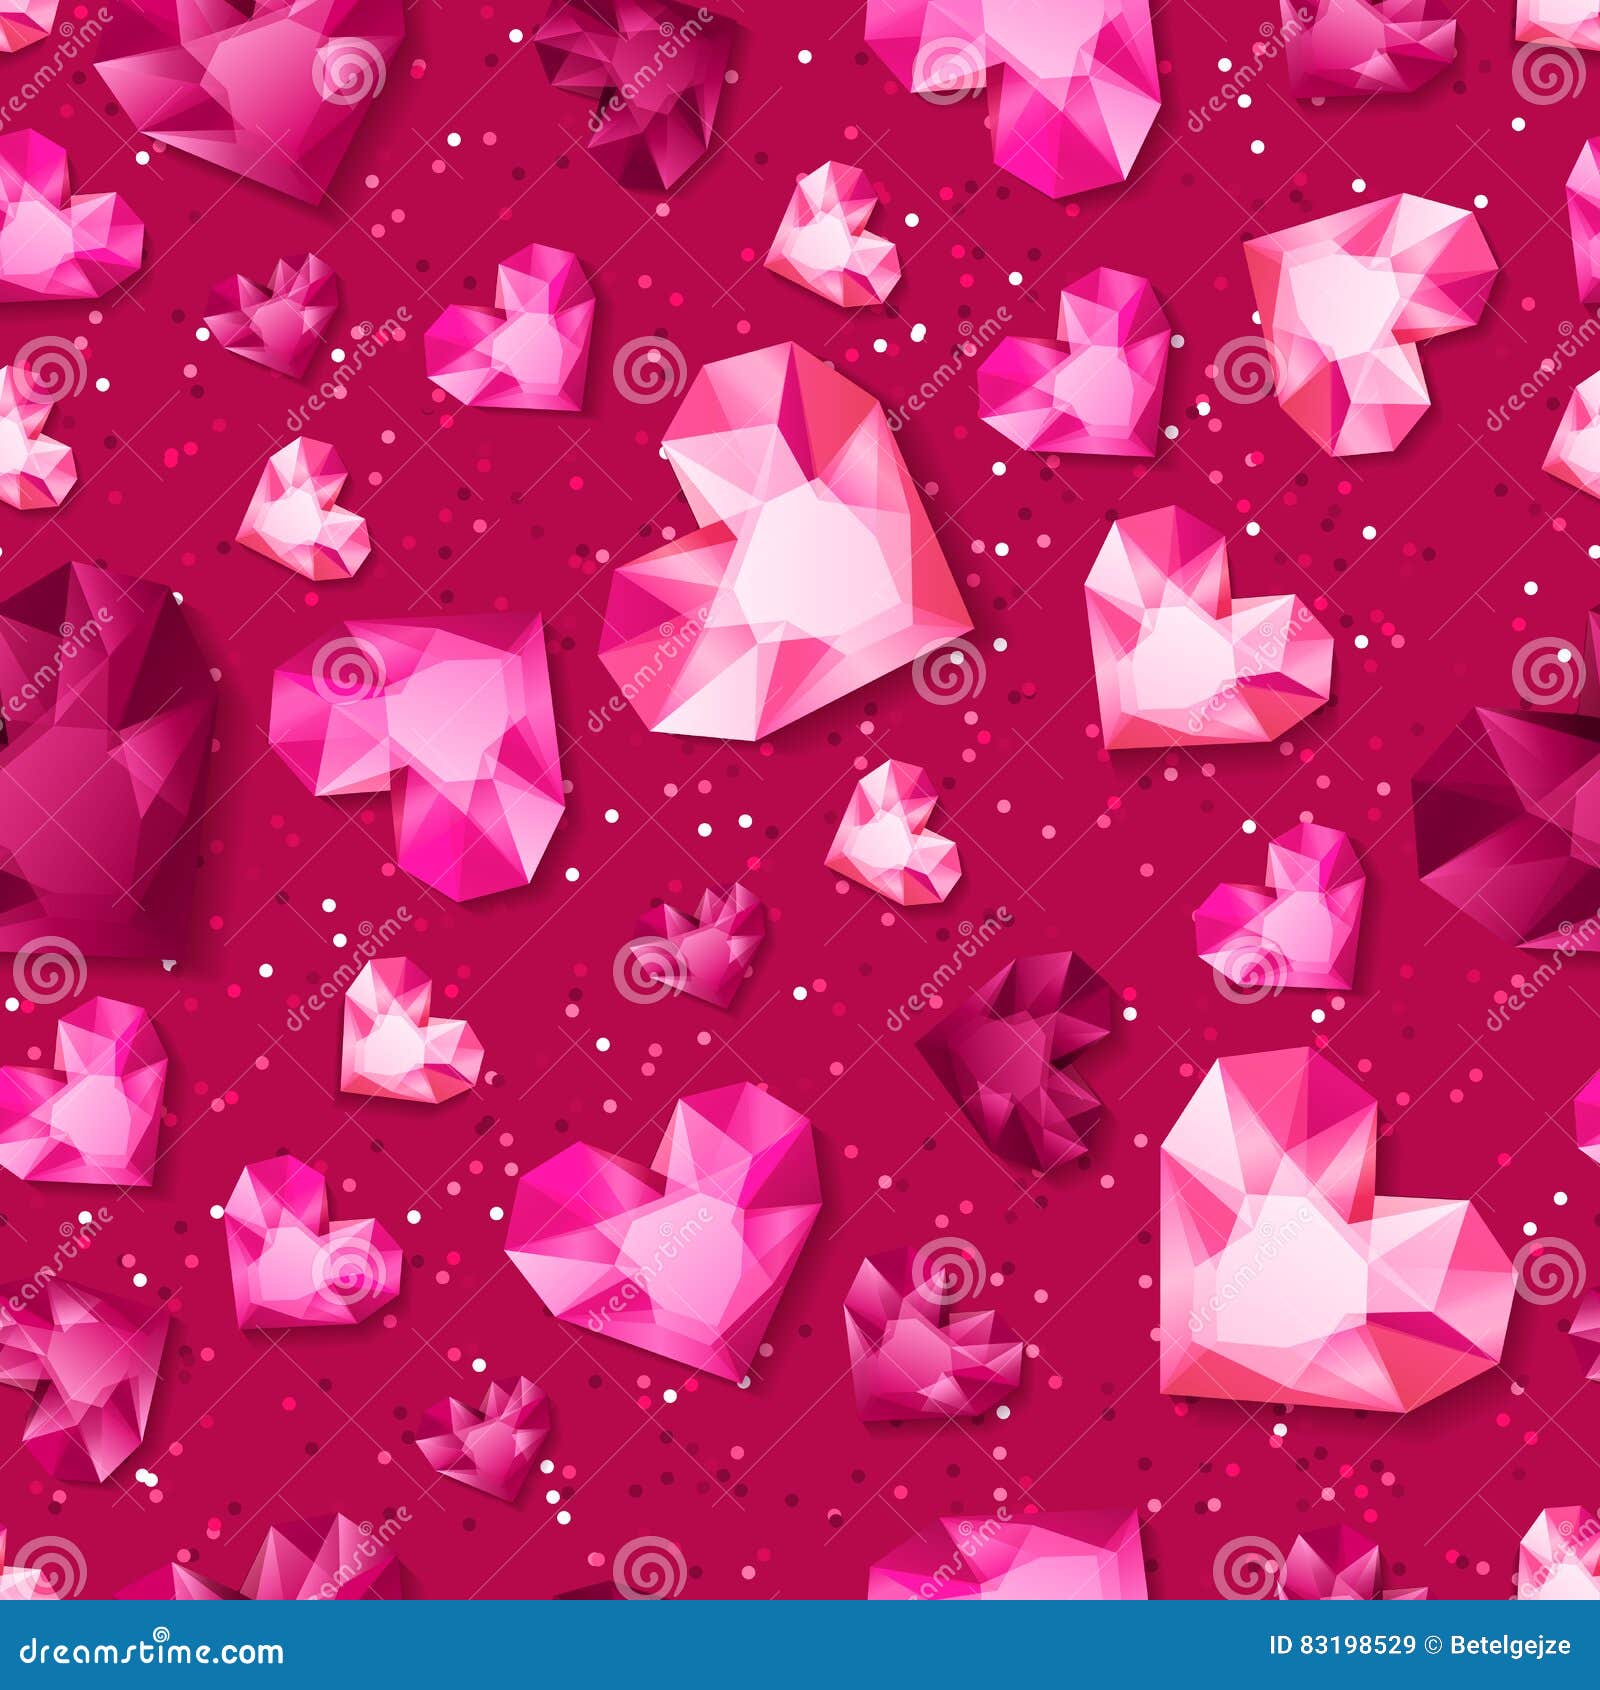 Vector Seamless Pink Glossy Background with 3d Gold Heart Diamonds